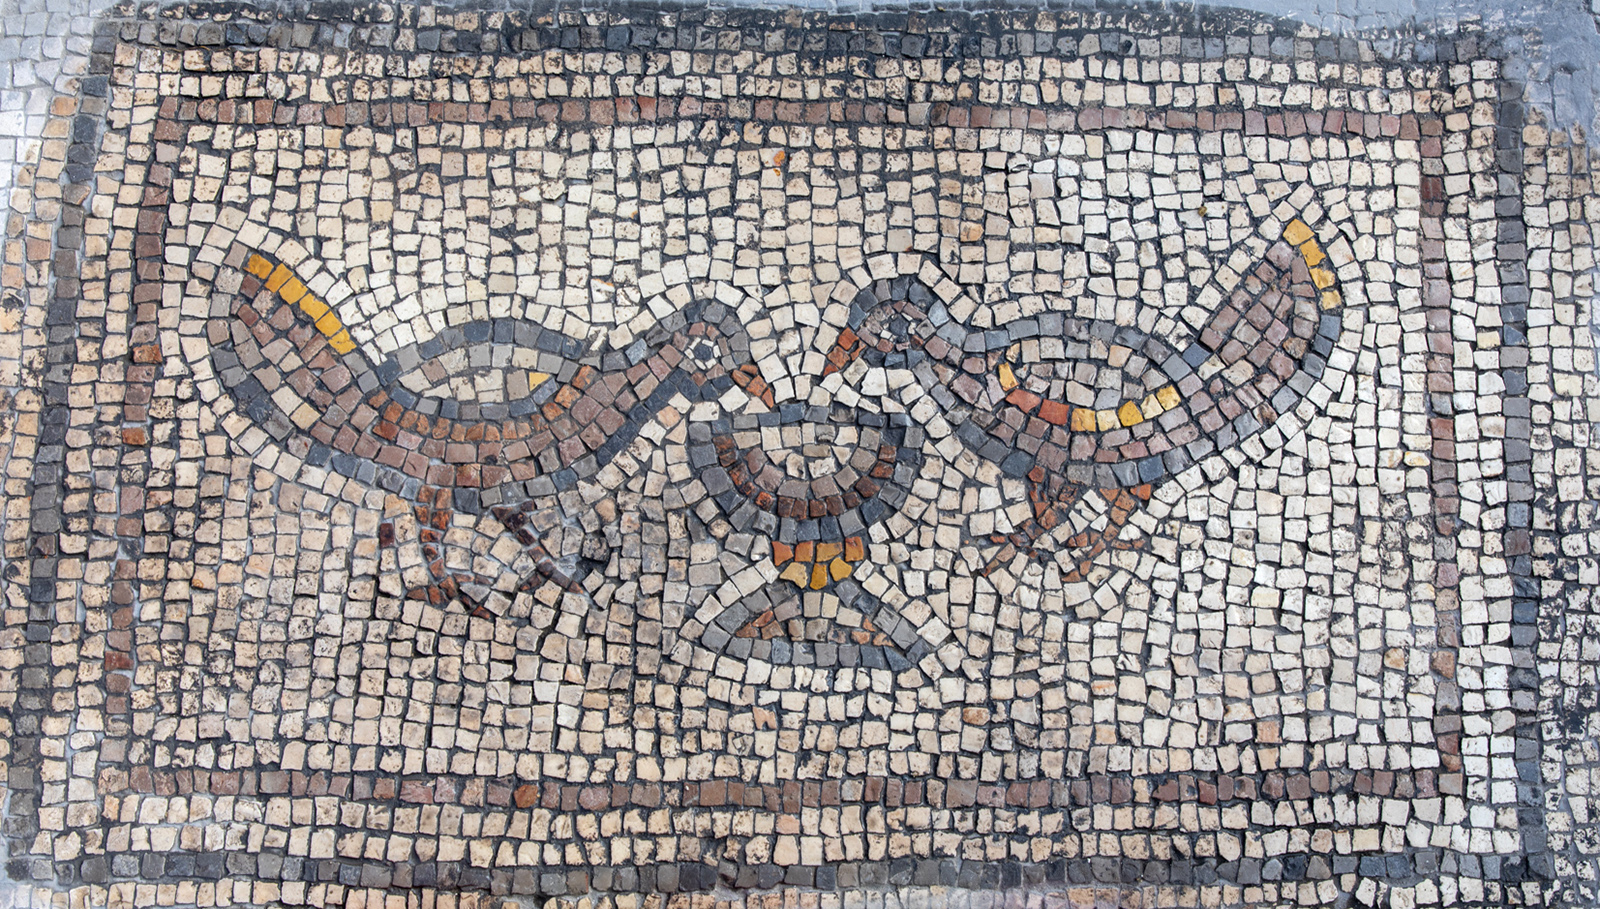 miracle of the loaves and fishes mosaic